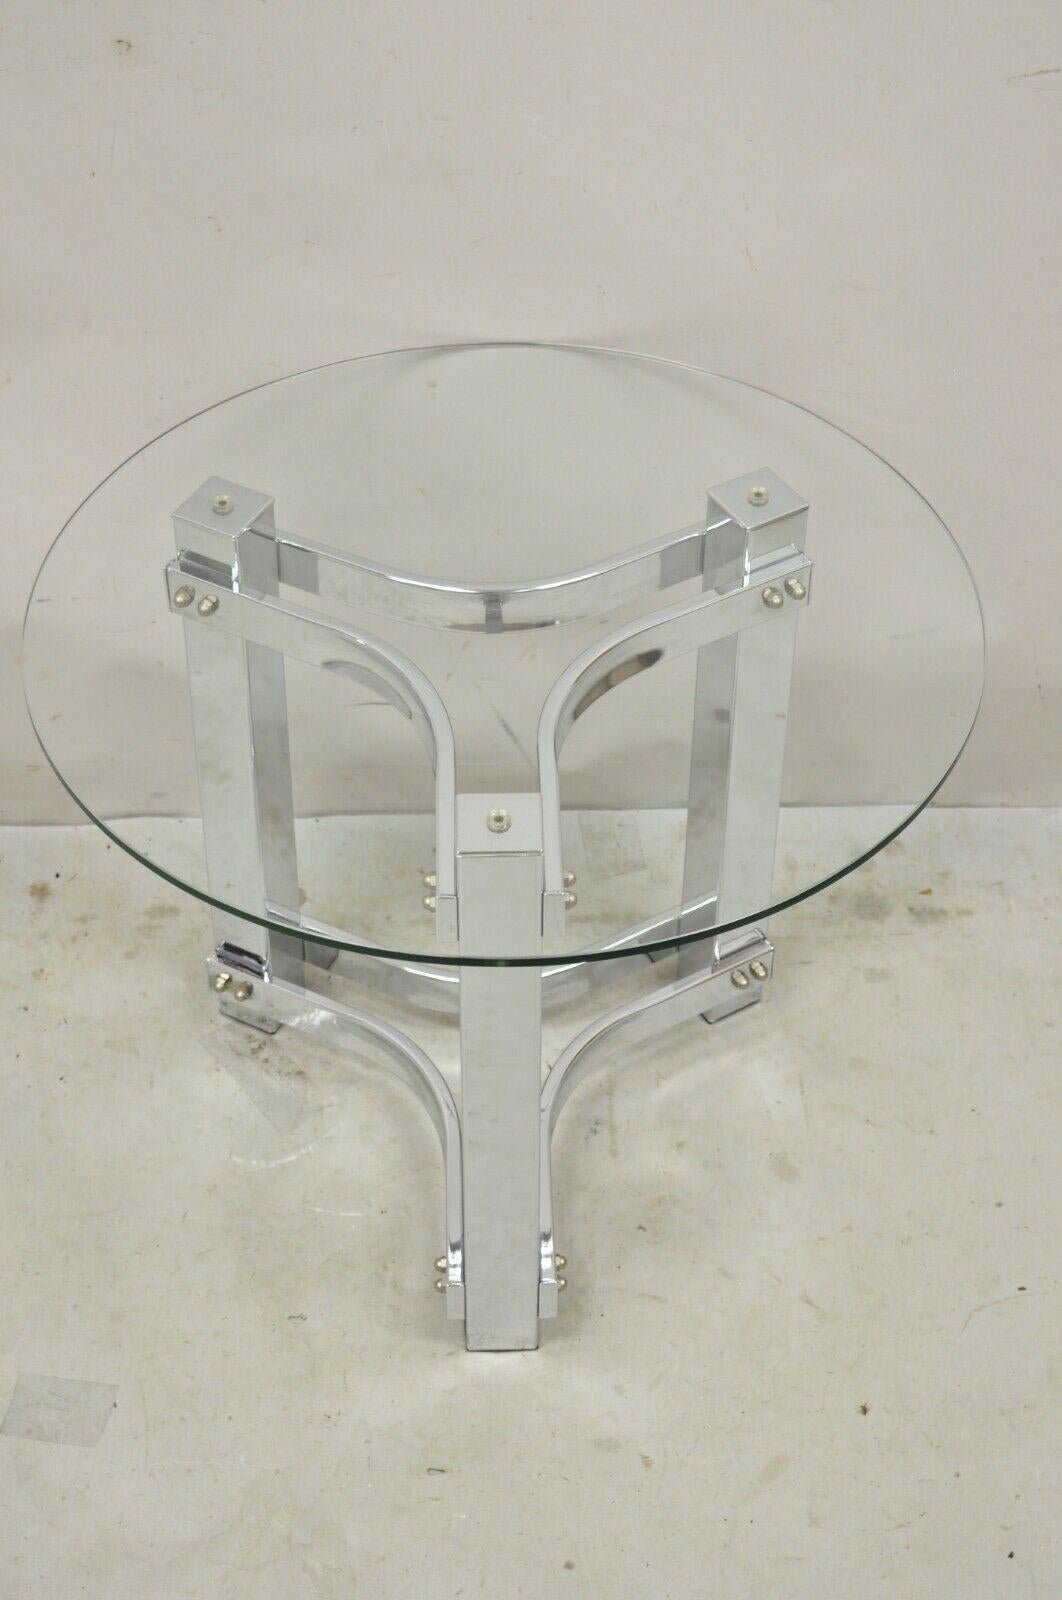 Vintage Chrome and Glass Mid Century Modern Space Age Round Accent Side Table. Item features a space age chrome metal base, round glass top, great style and form. Circa 1970s. Measurements: 19.75